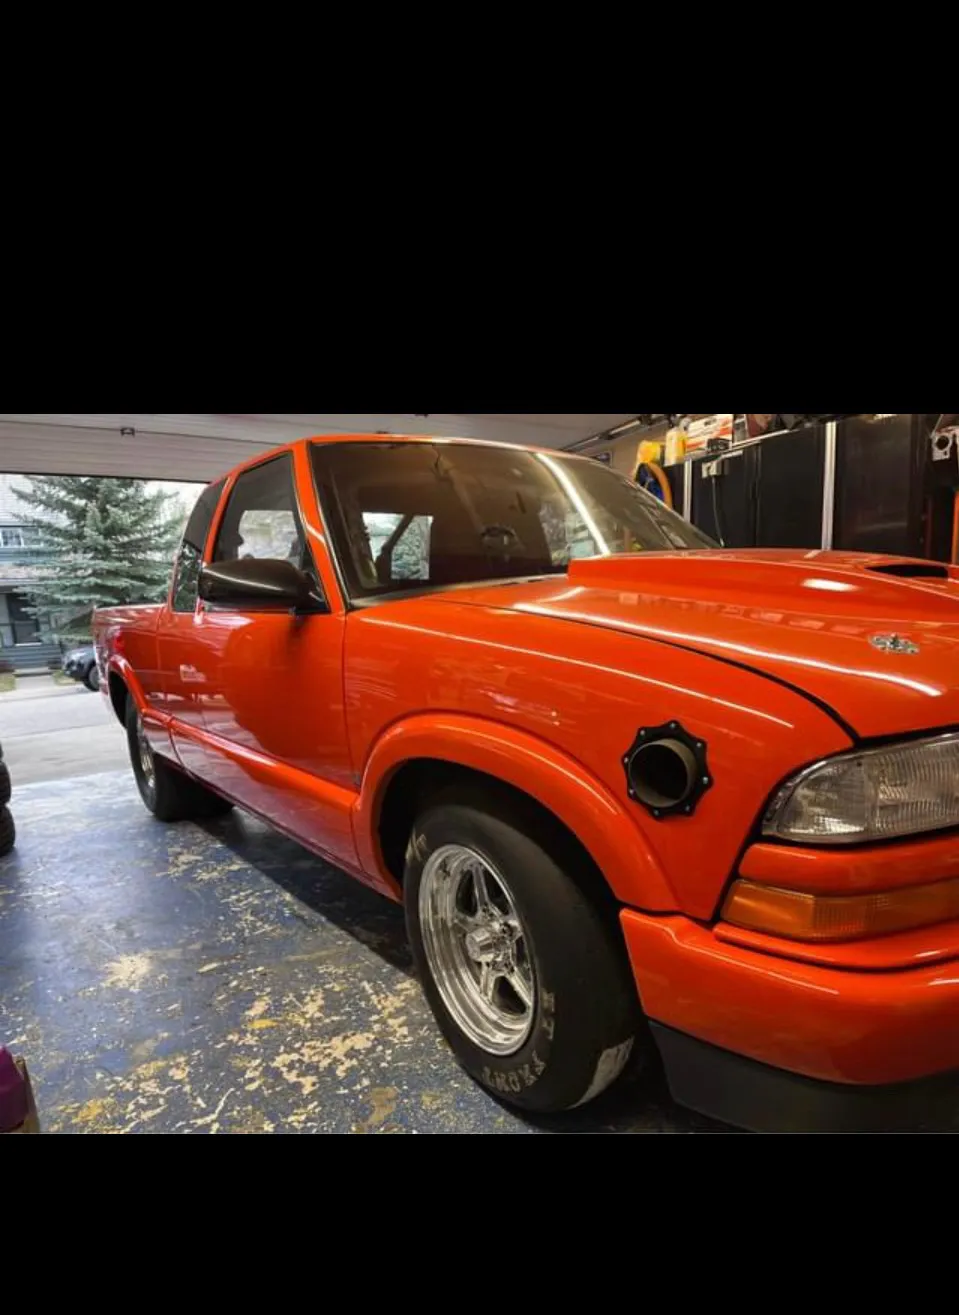 2000 Chevy S-10 race truck